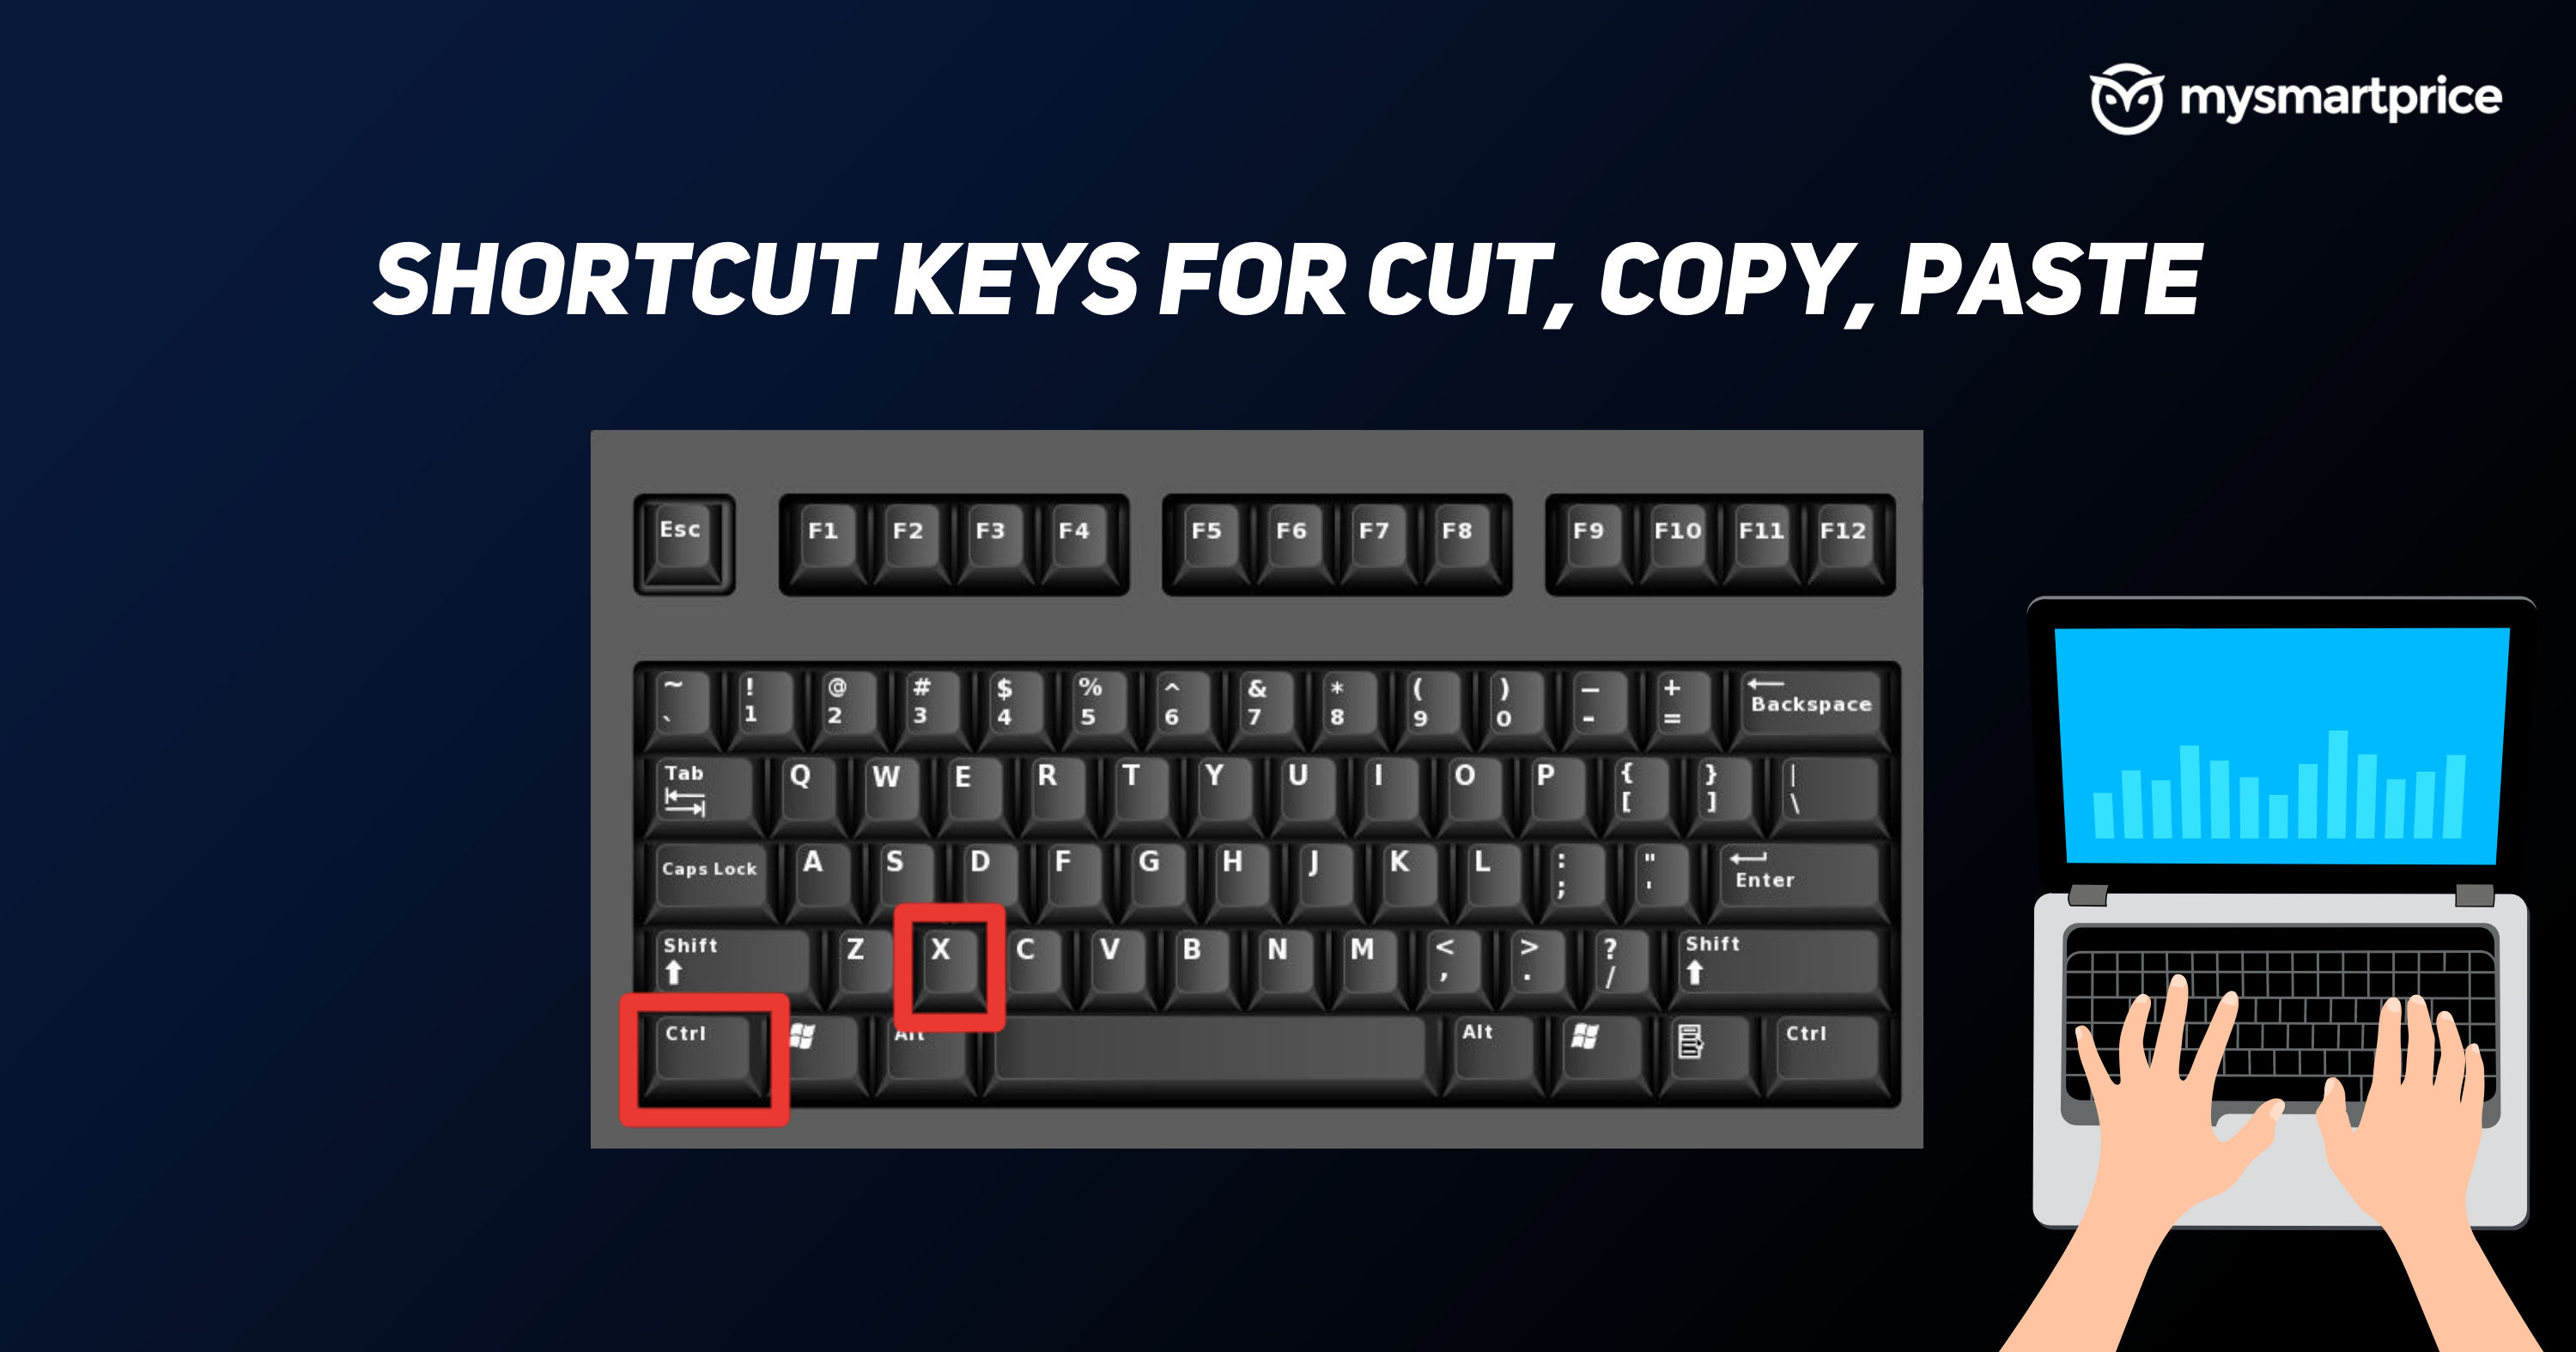 shortcut-keys-for-cut-copy-paste-what-are-the-keyboard-shortcuts-to-cut-copy-and-paste